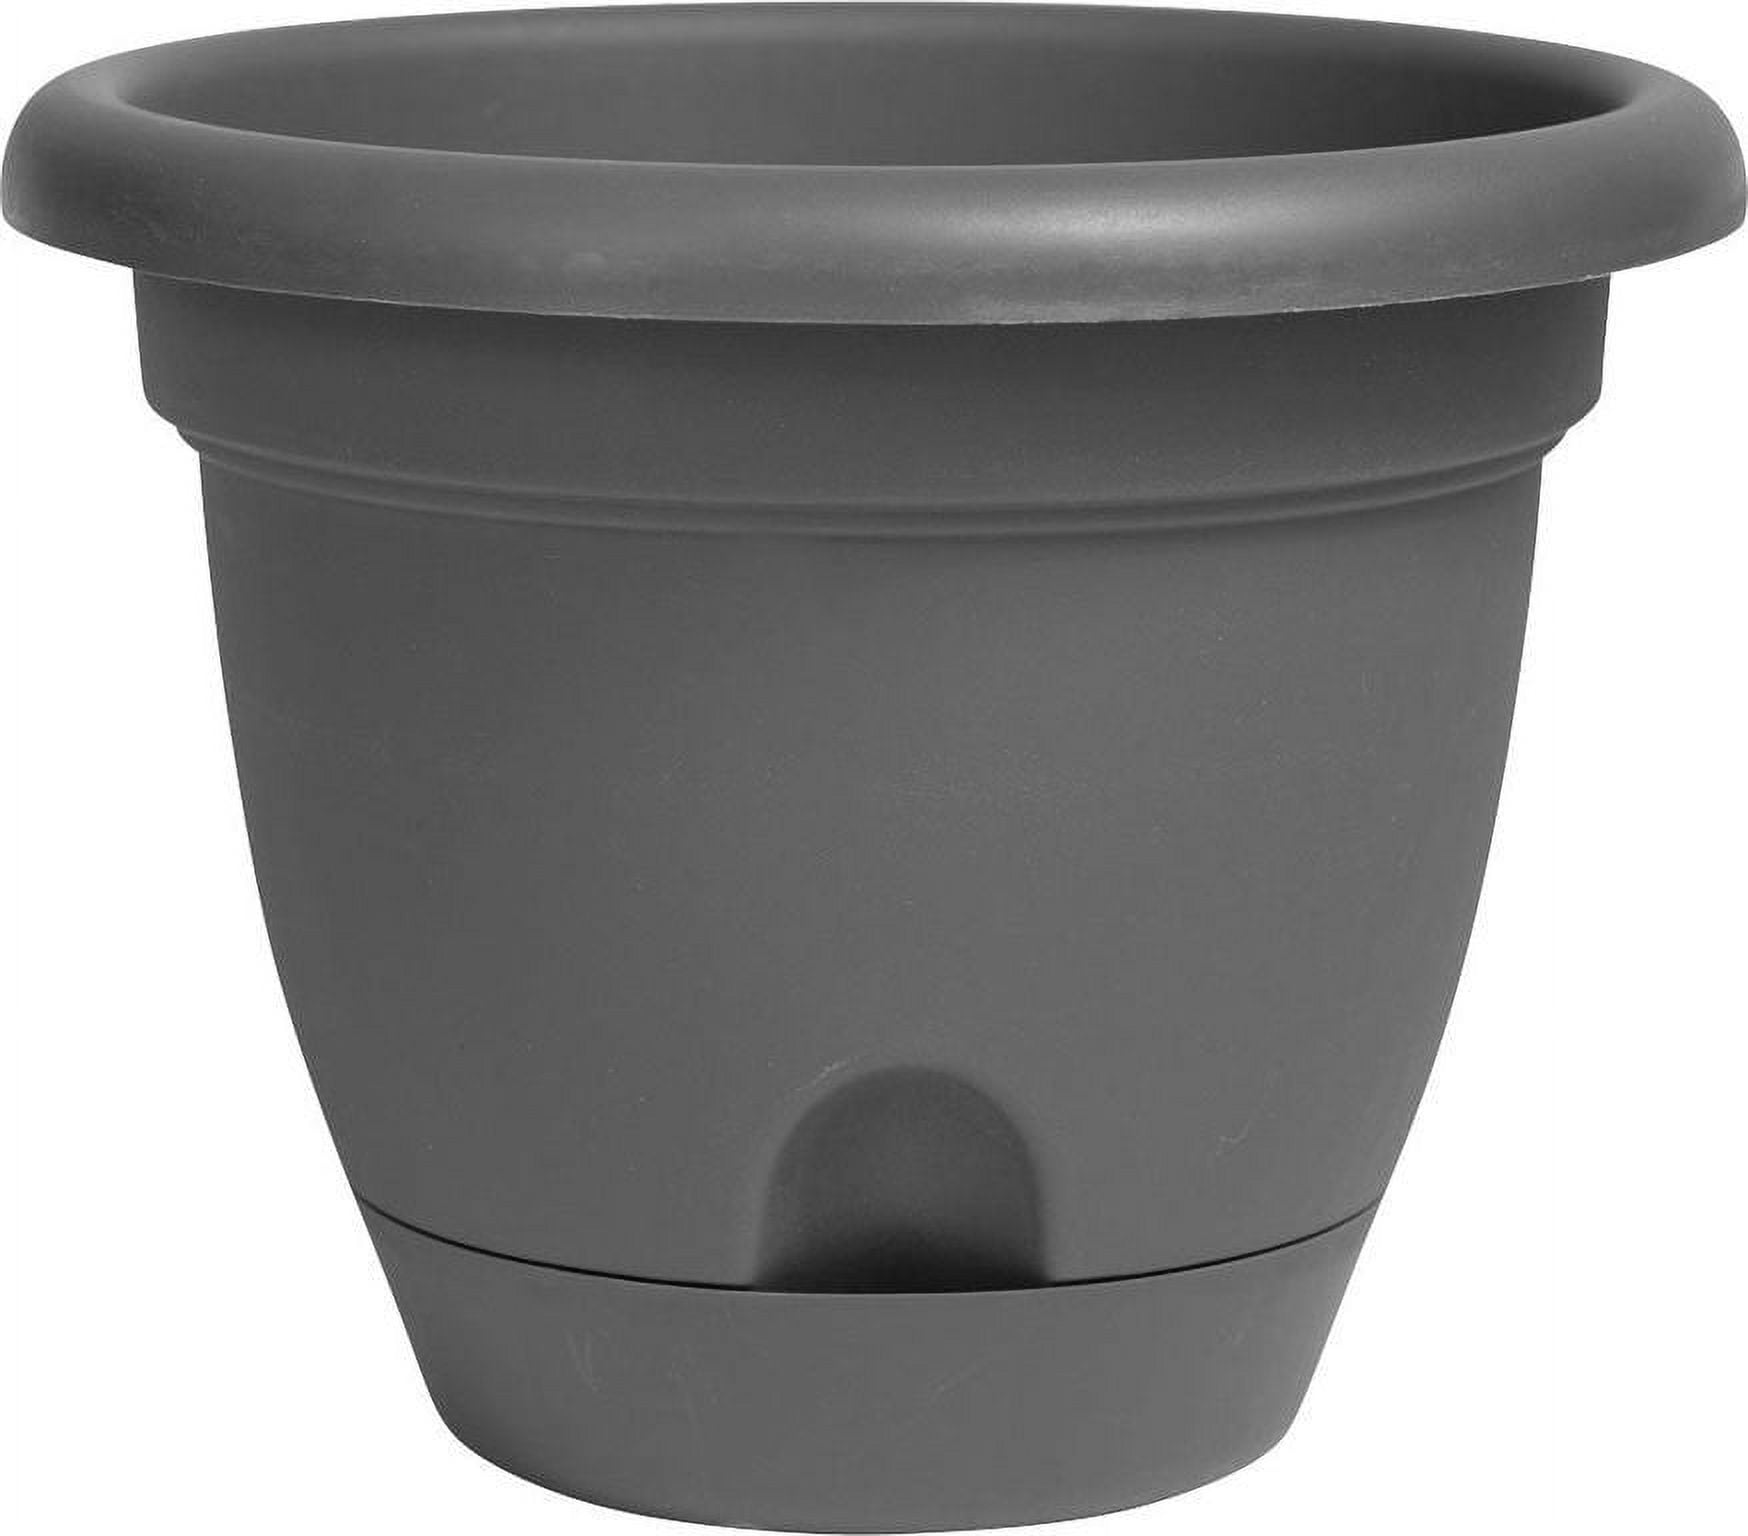 Lp08908 8 In. Lucca Self Watering Planter With Saucer, Charcoal